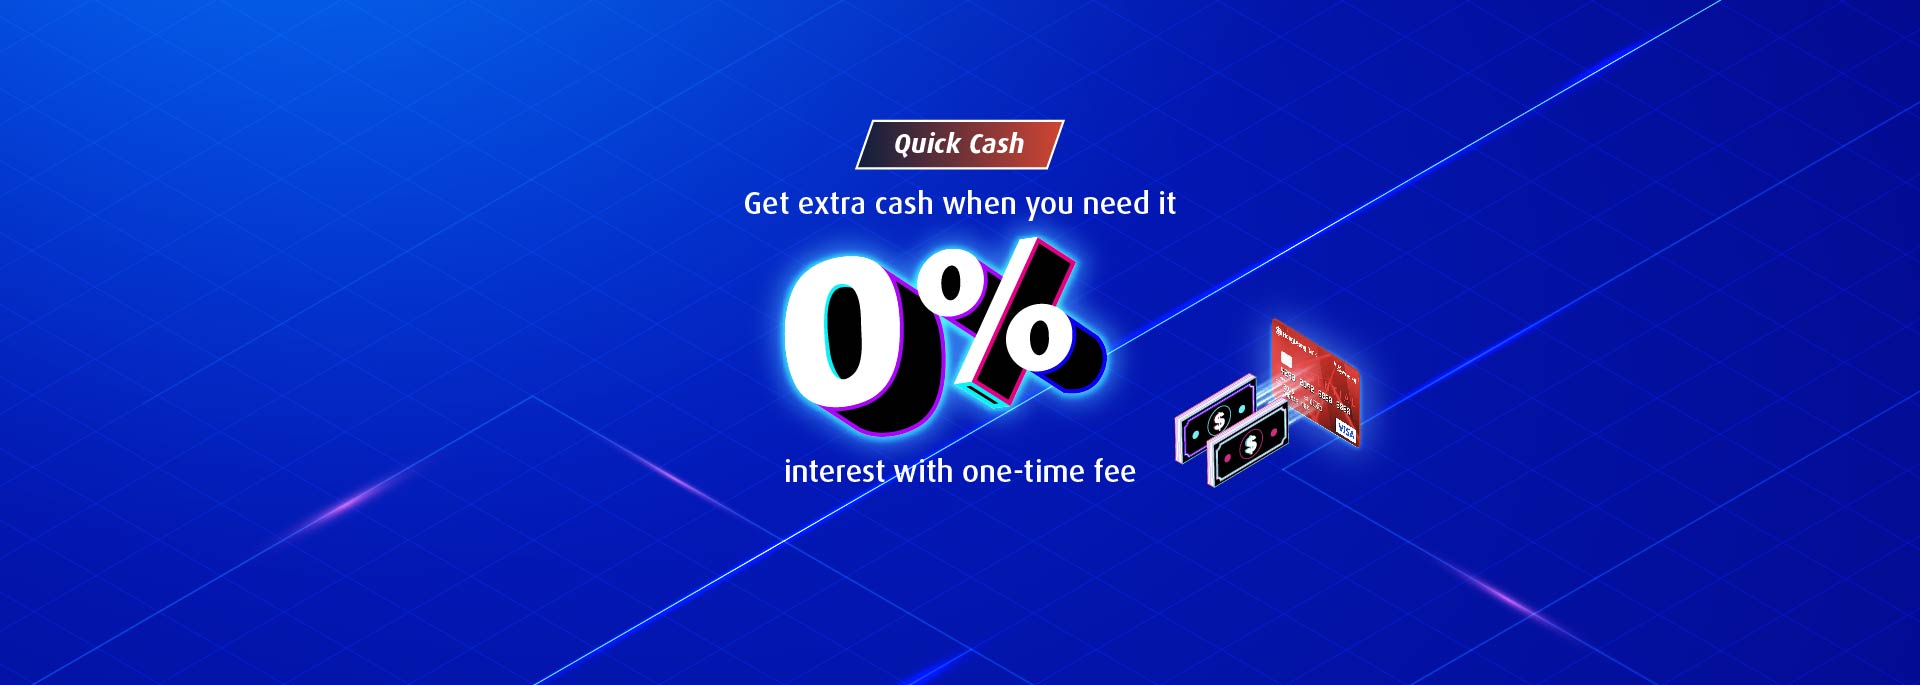 cards quick cash connect day promotion 2023 banner